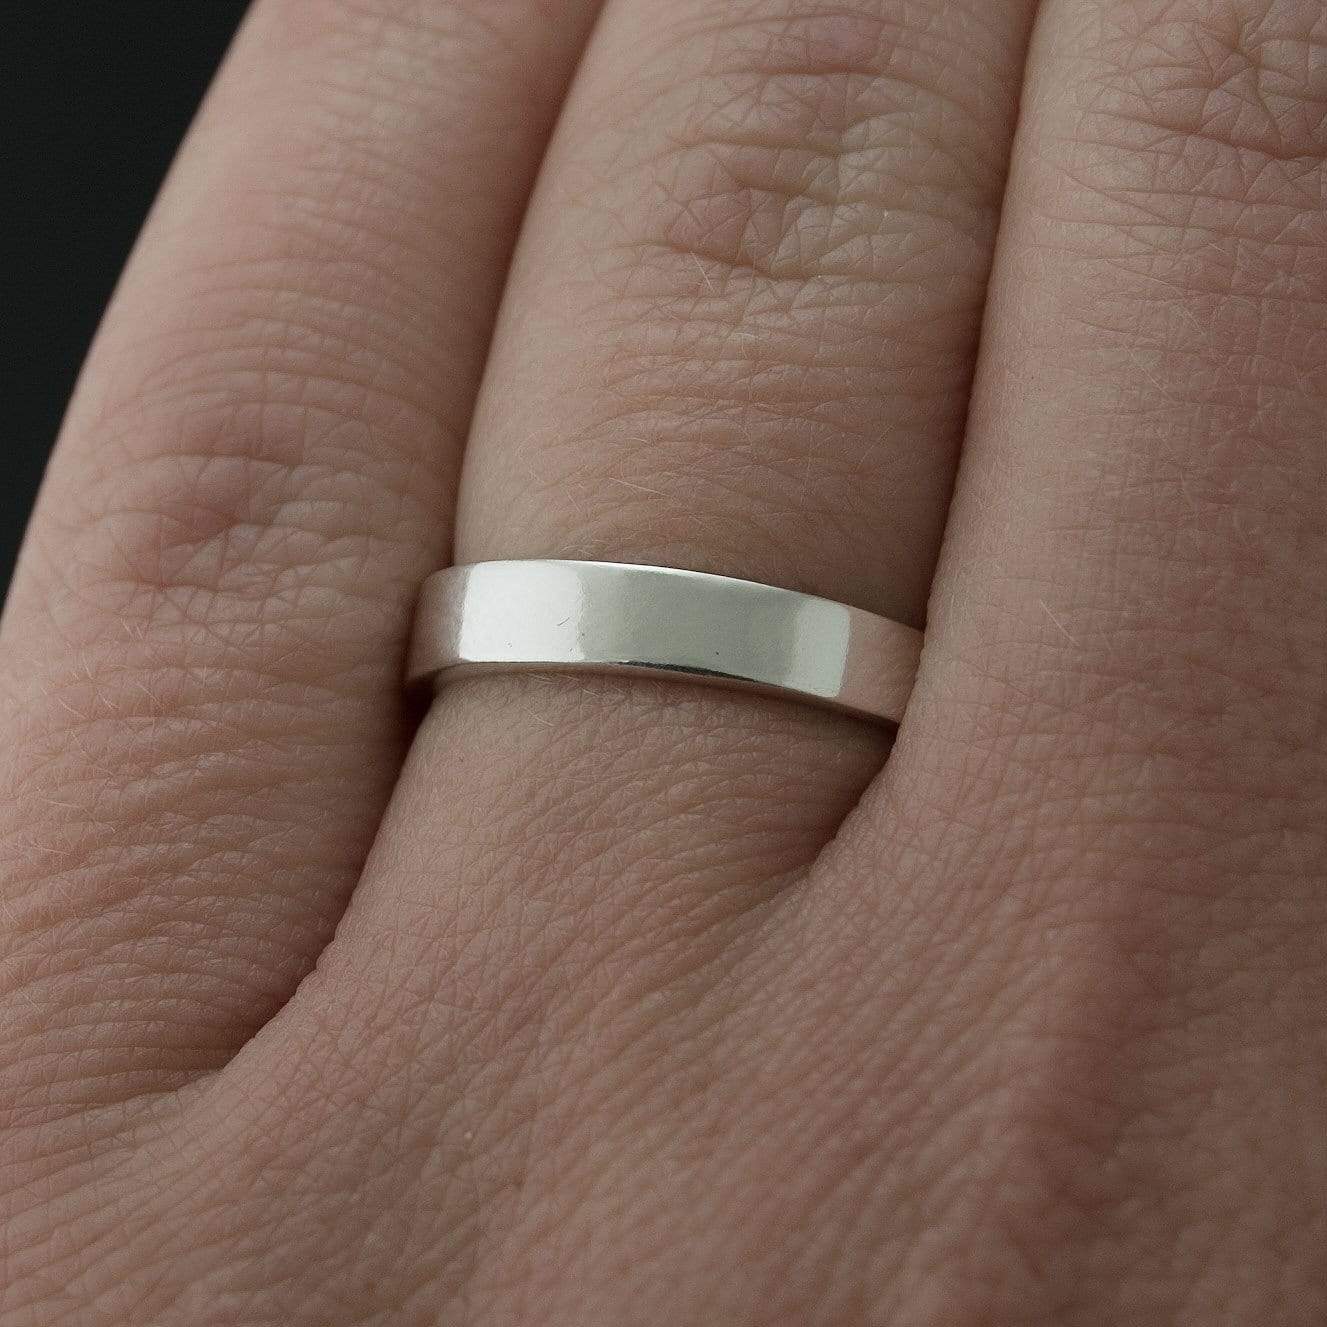 Simple Flat Style Wedding Bands, Set of 2 Wedding Rings Ring Set by Nodeform